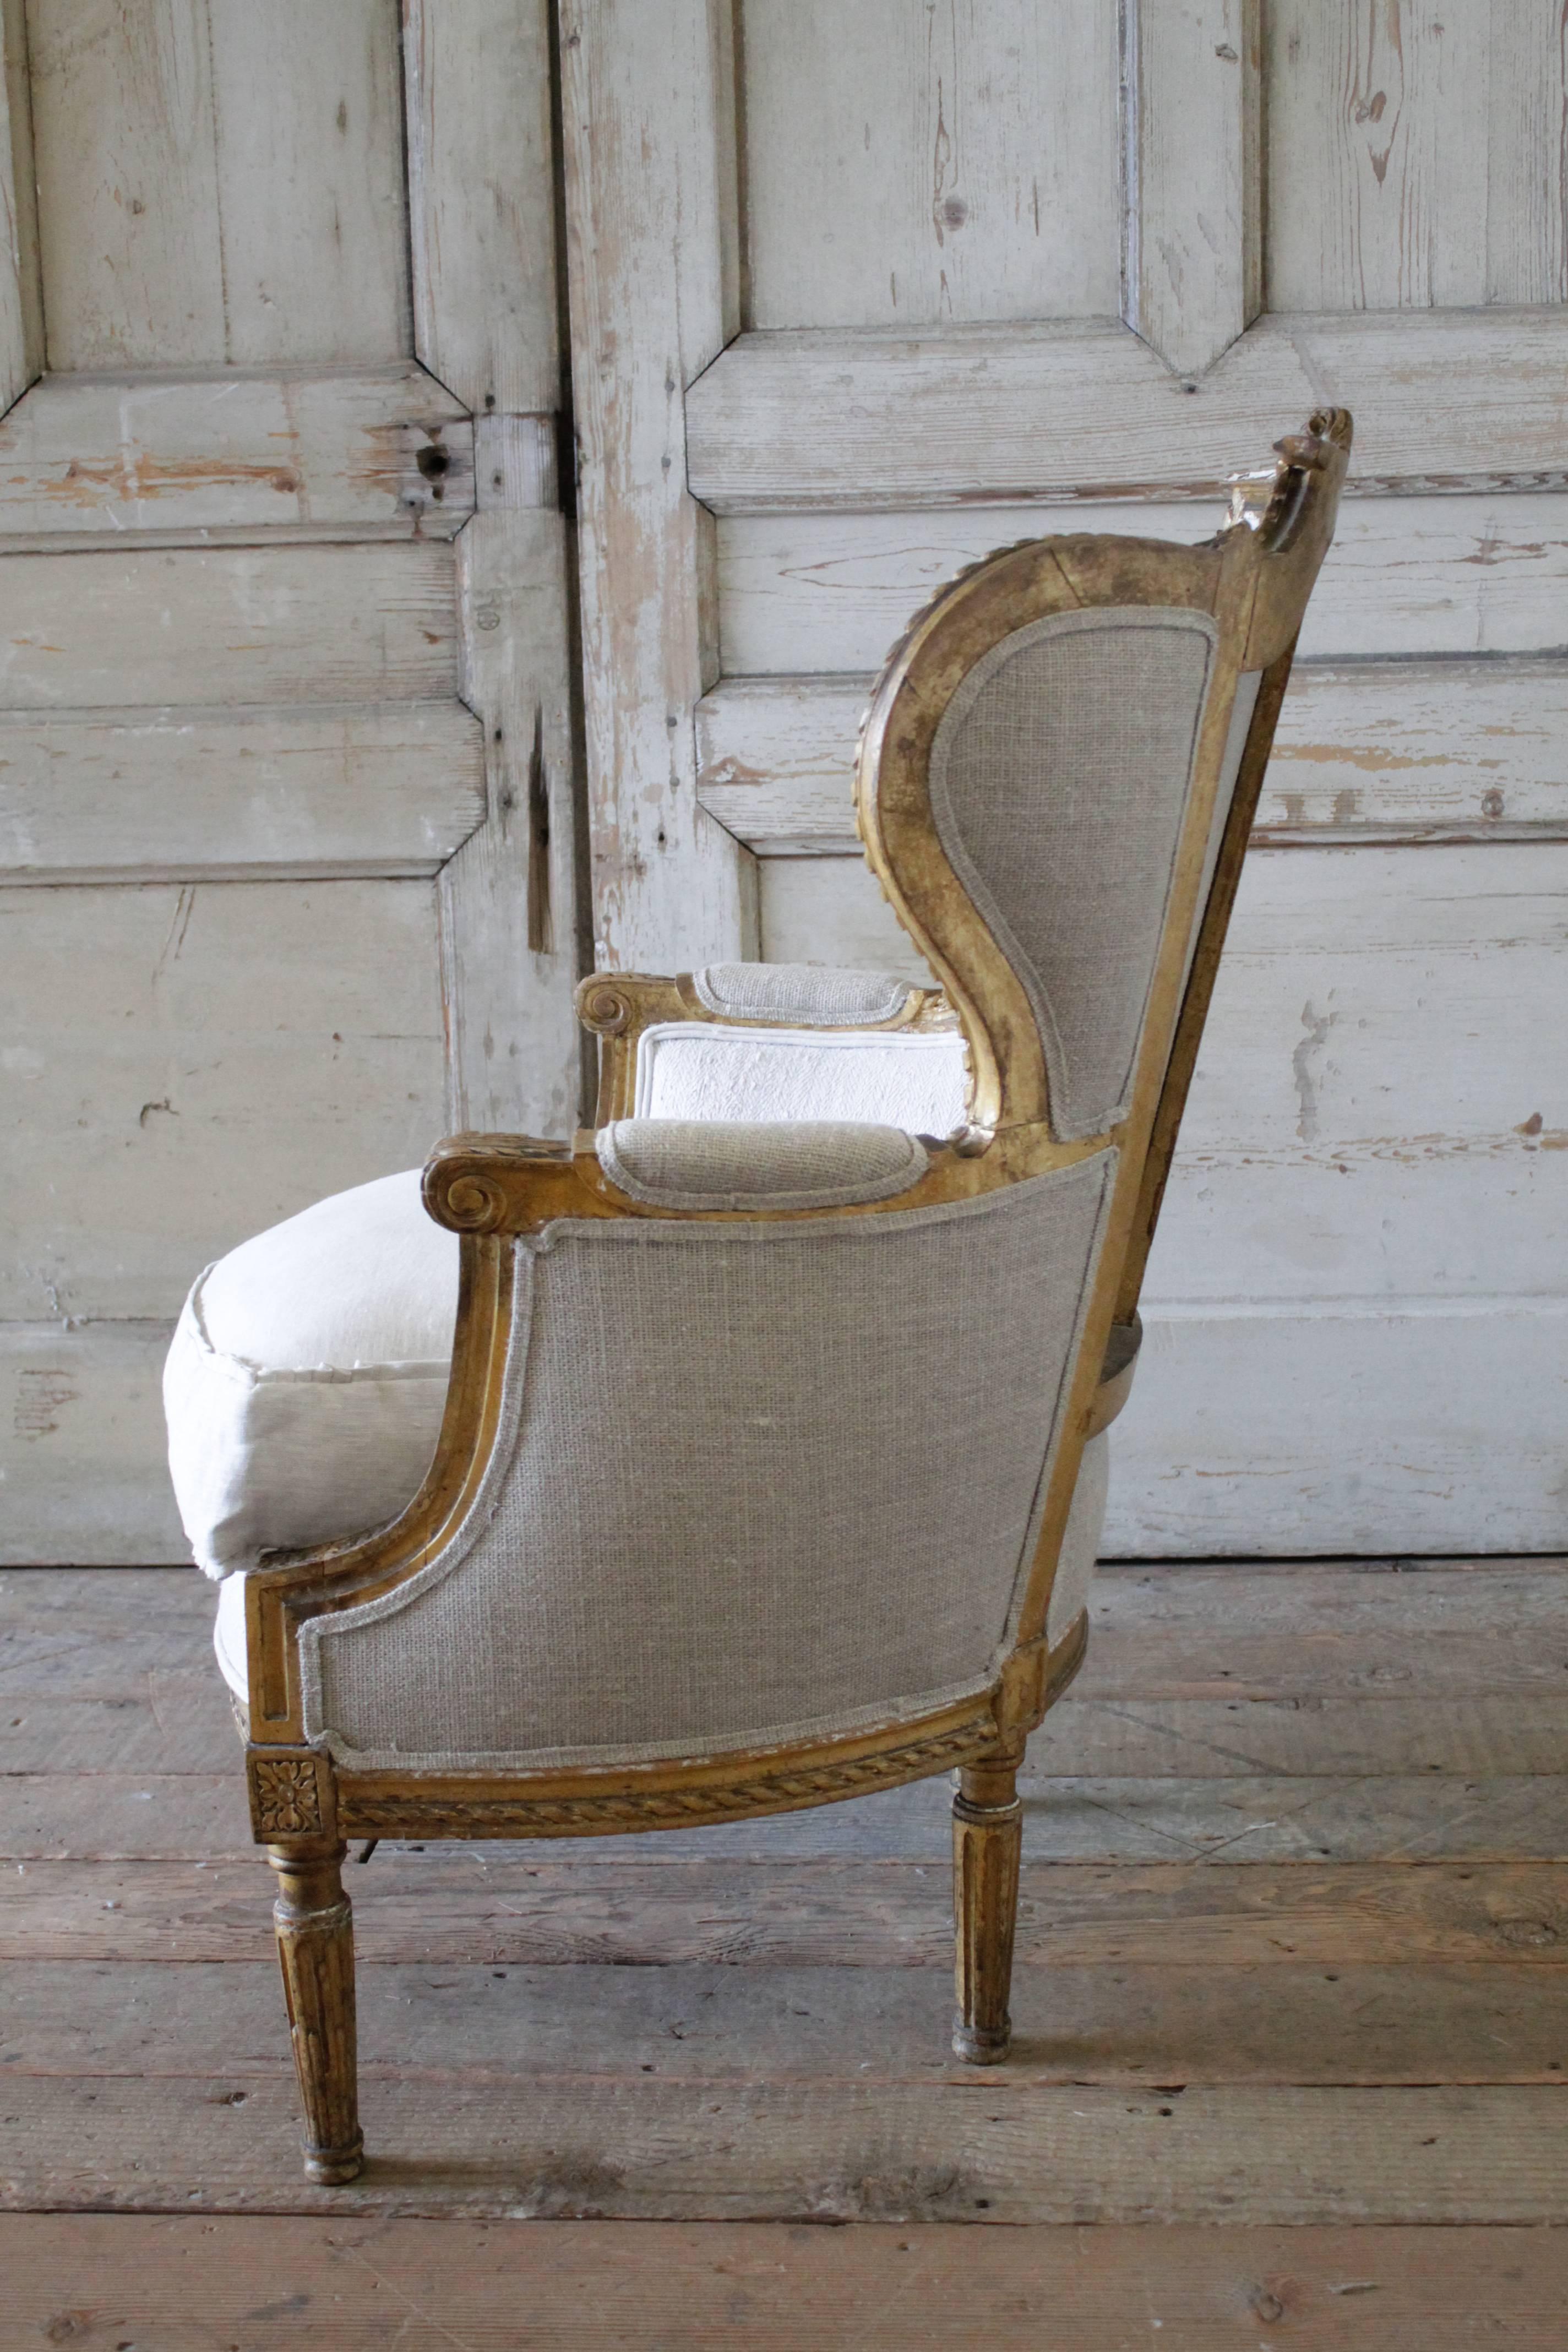 Linen Antique French Louis XVI Style Wing Chair in Antique Grain Sack Upholstery